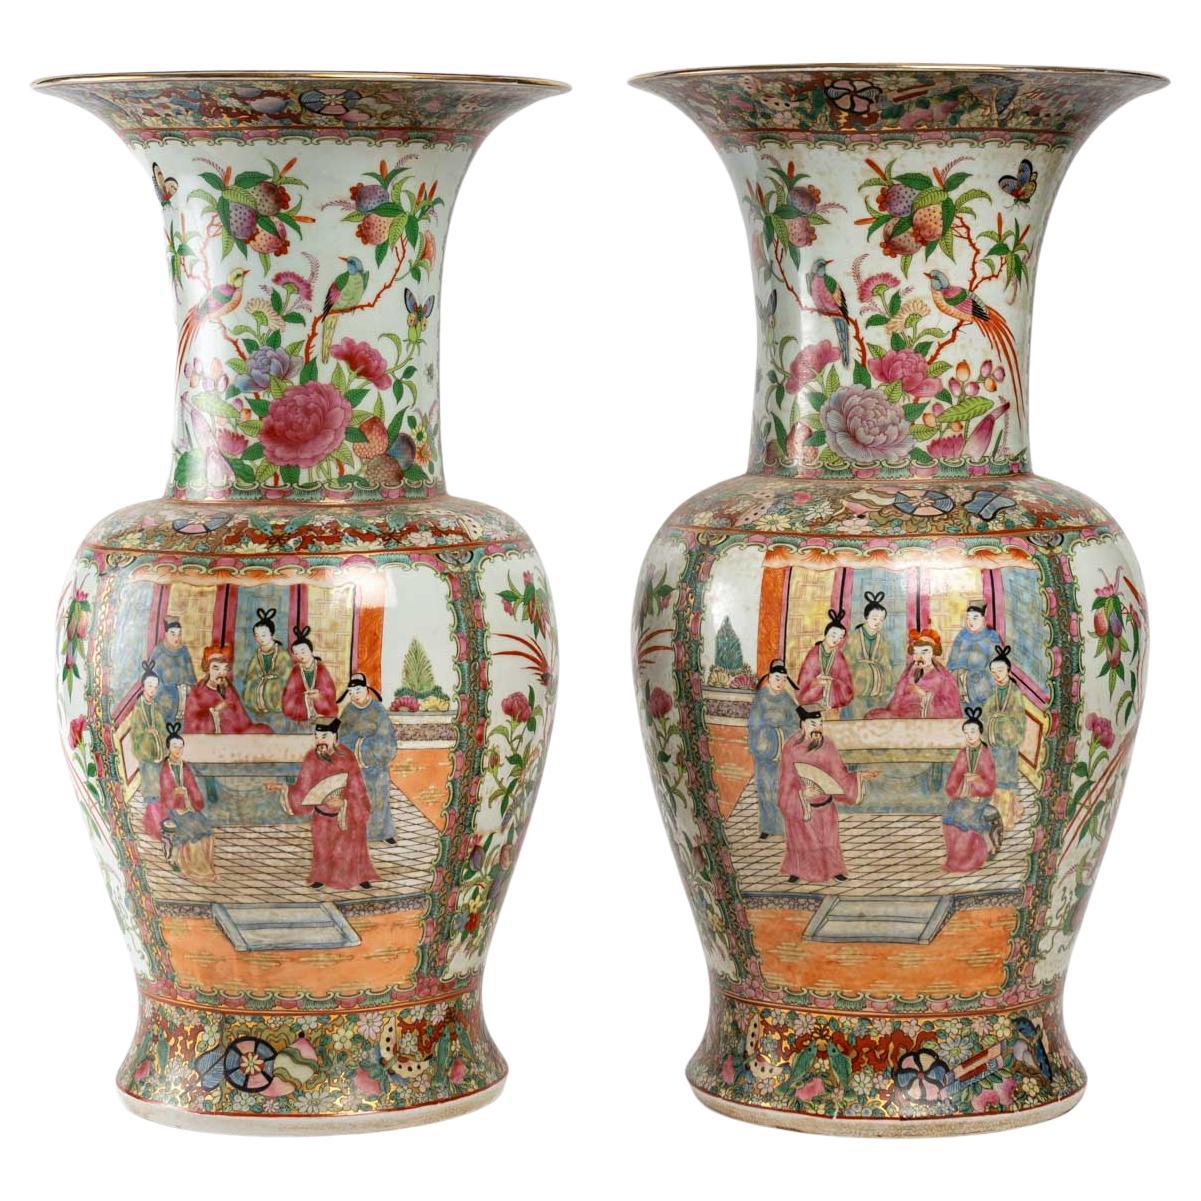 Important Pair of Canton Vases, China